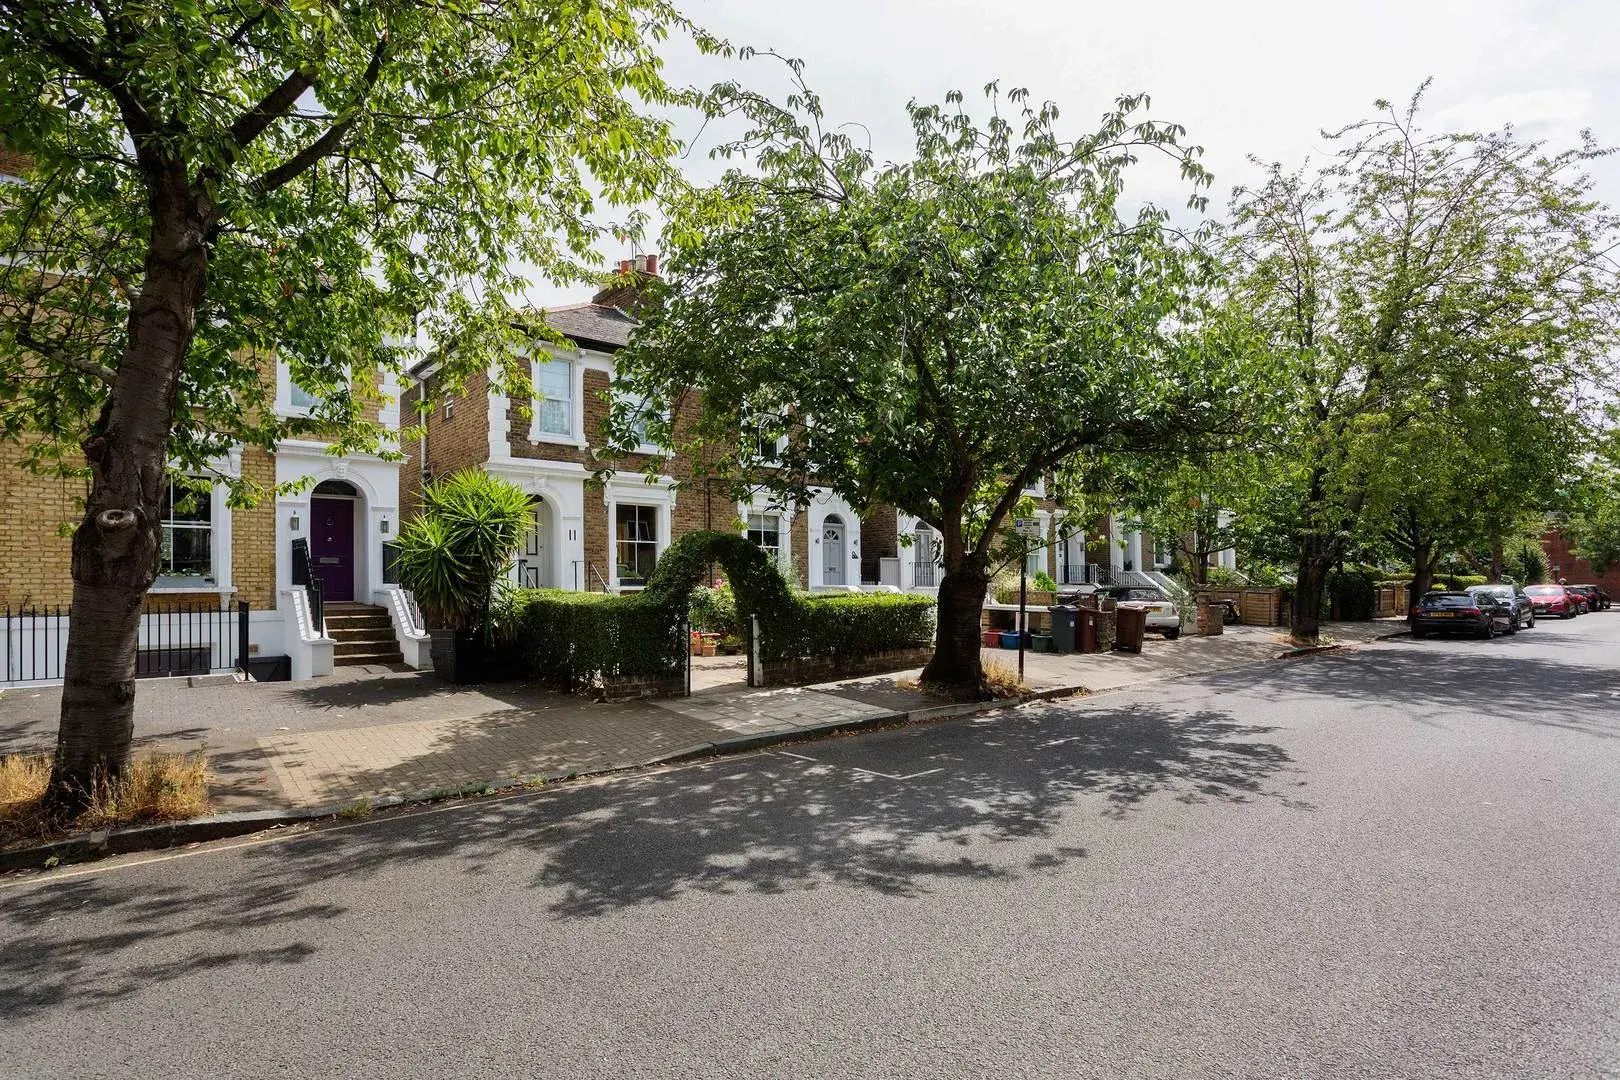 Cambridge Road North, holiday home in Chiswick, London